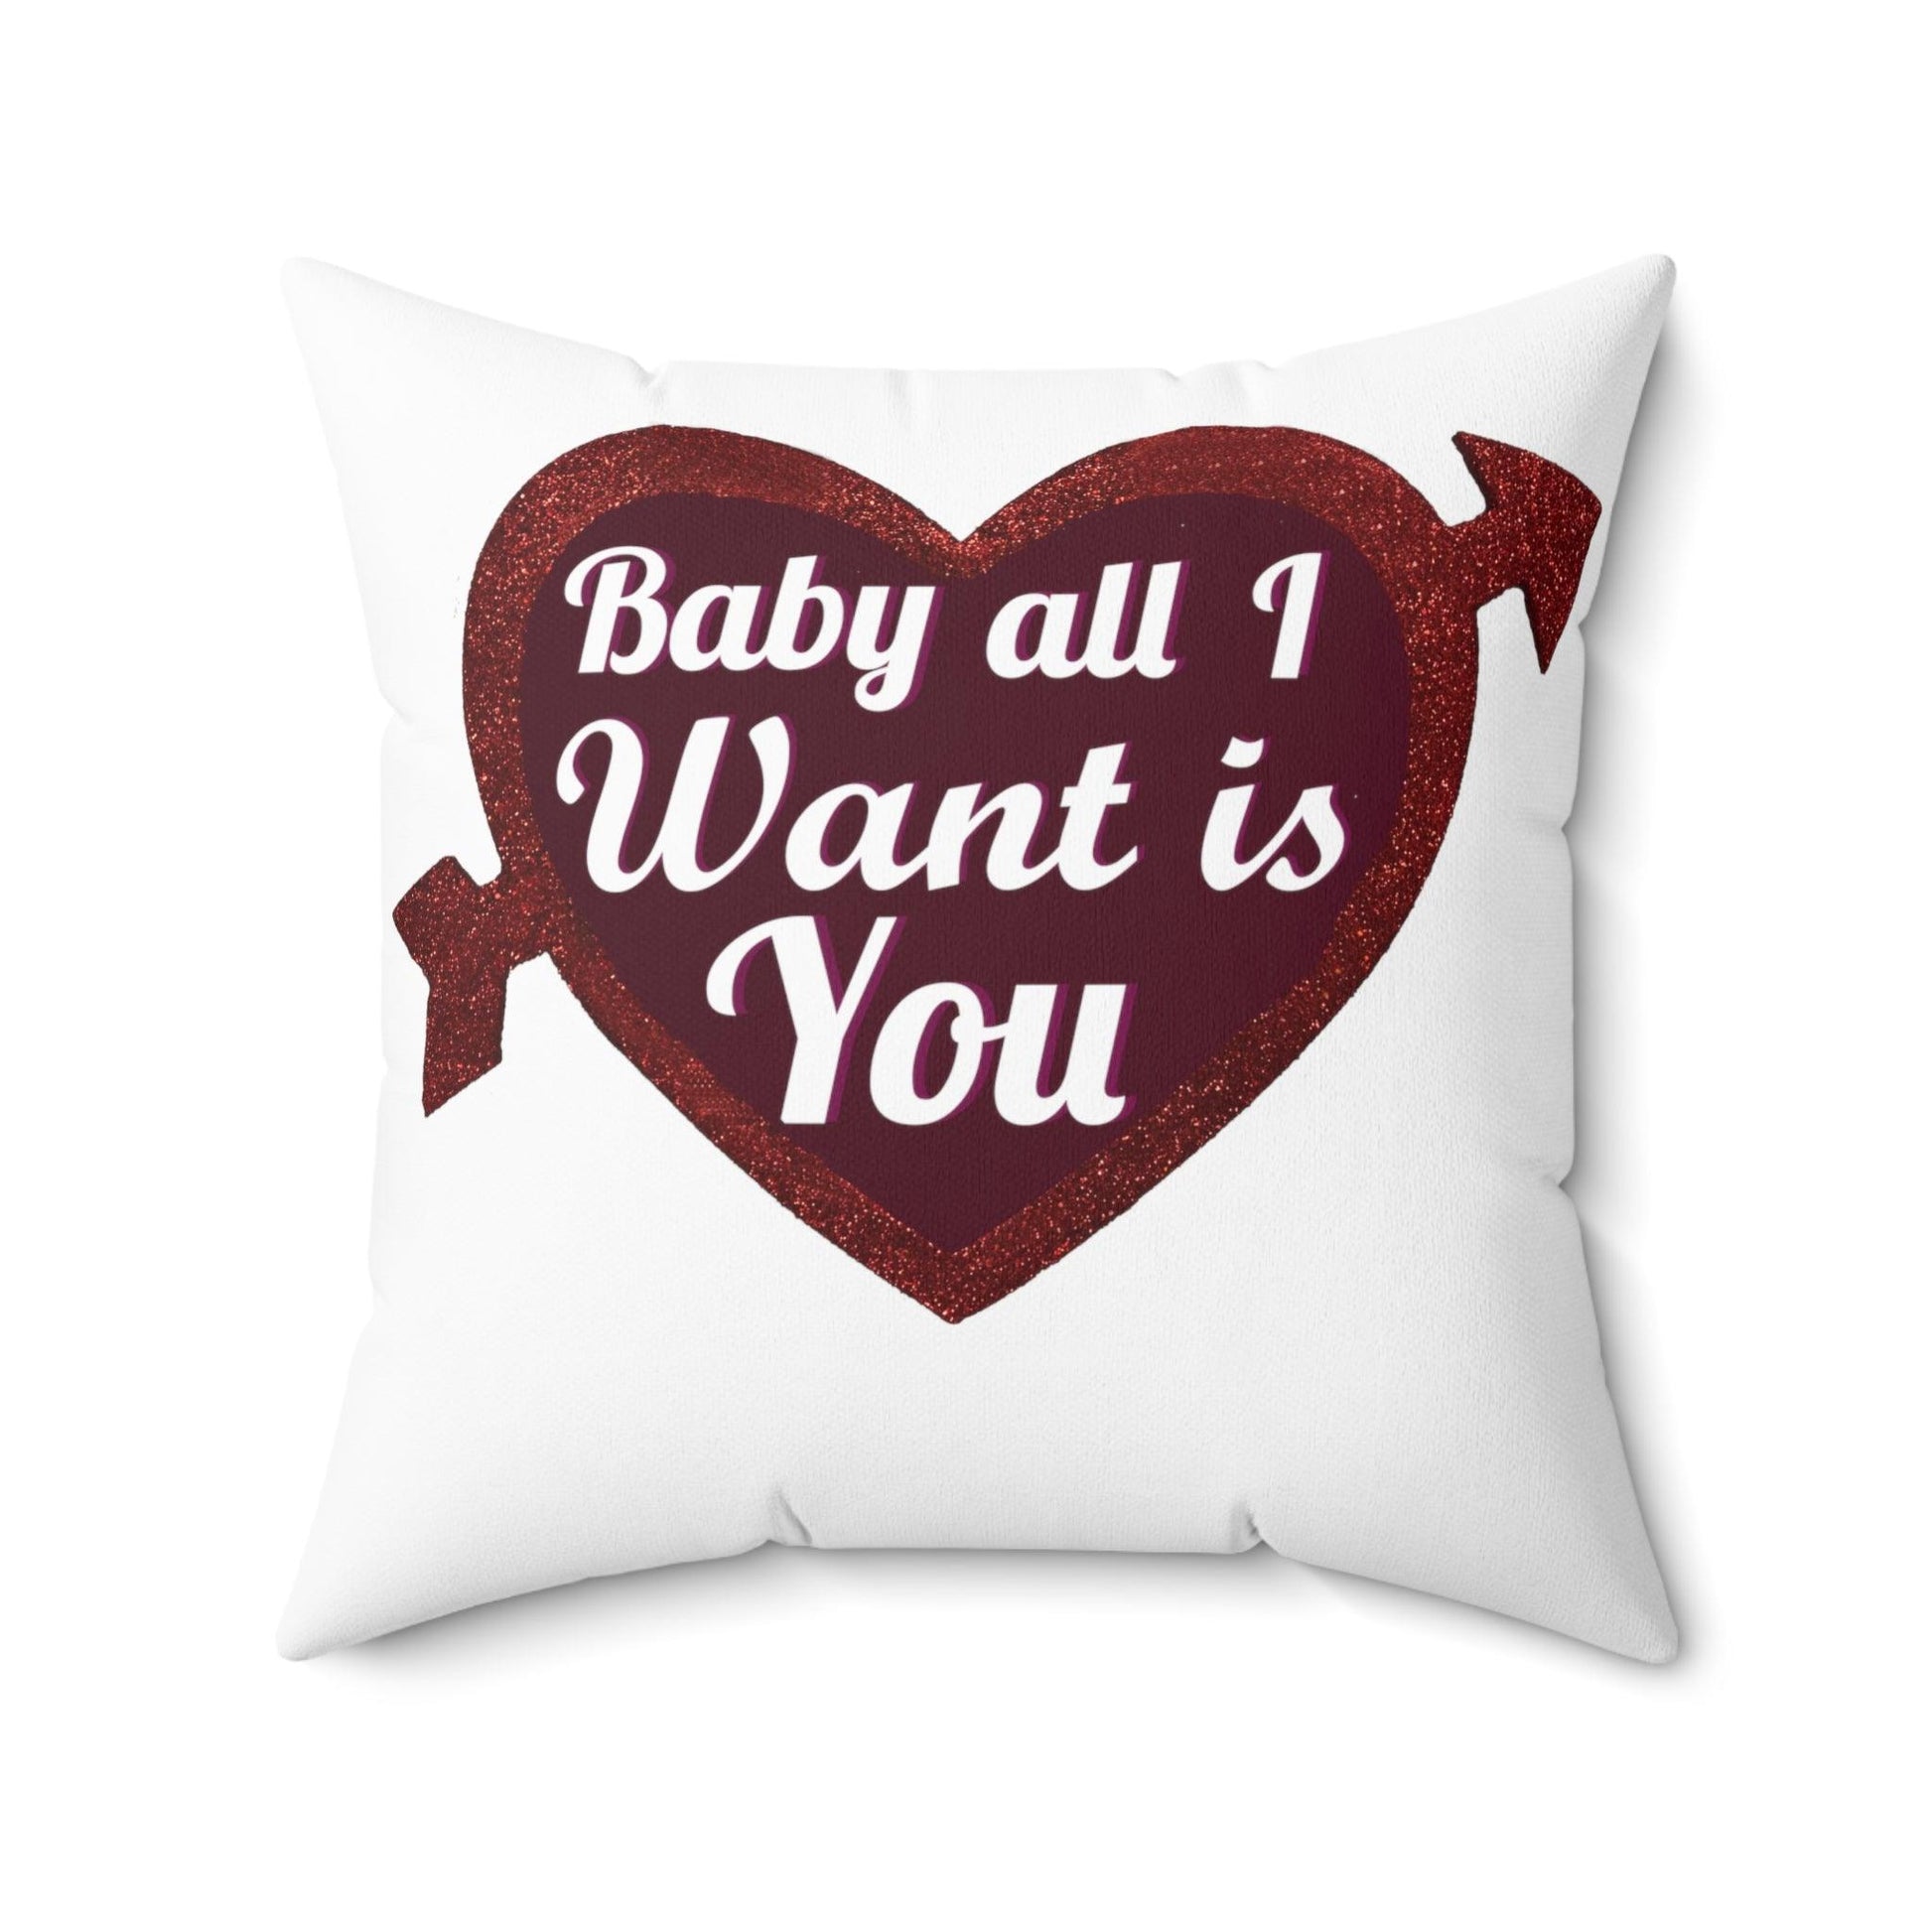 Baby all I want is You Square Pillow - Giftsmojo